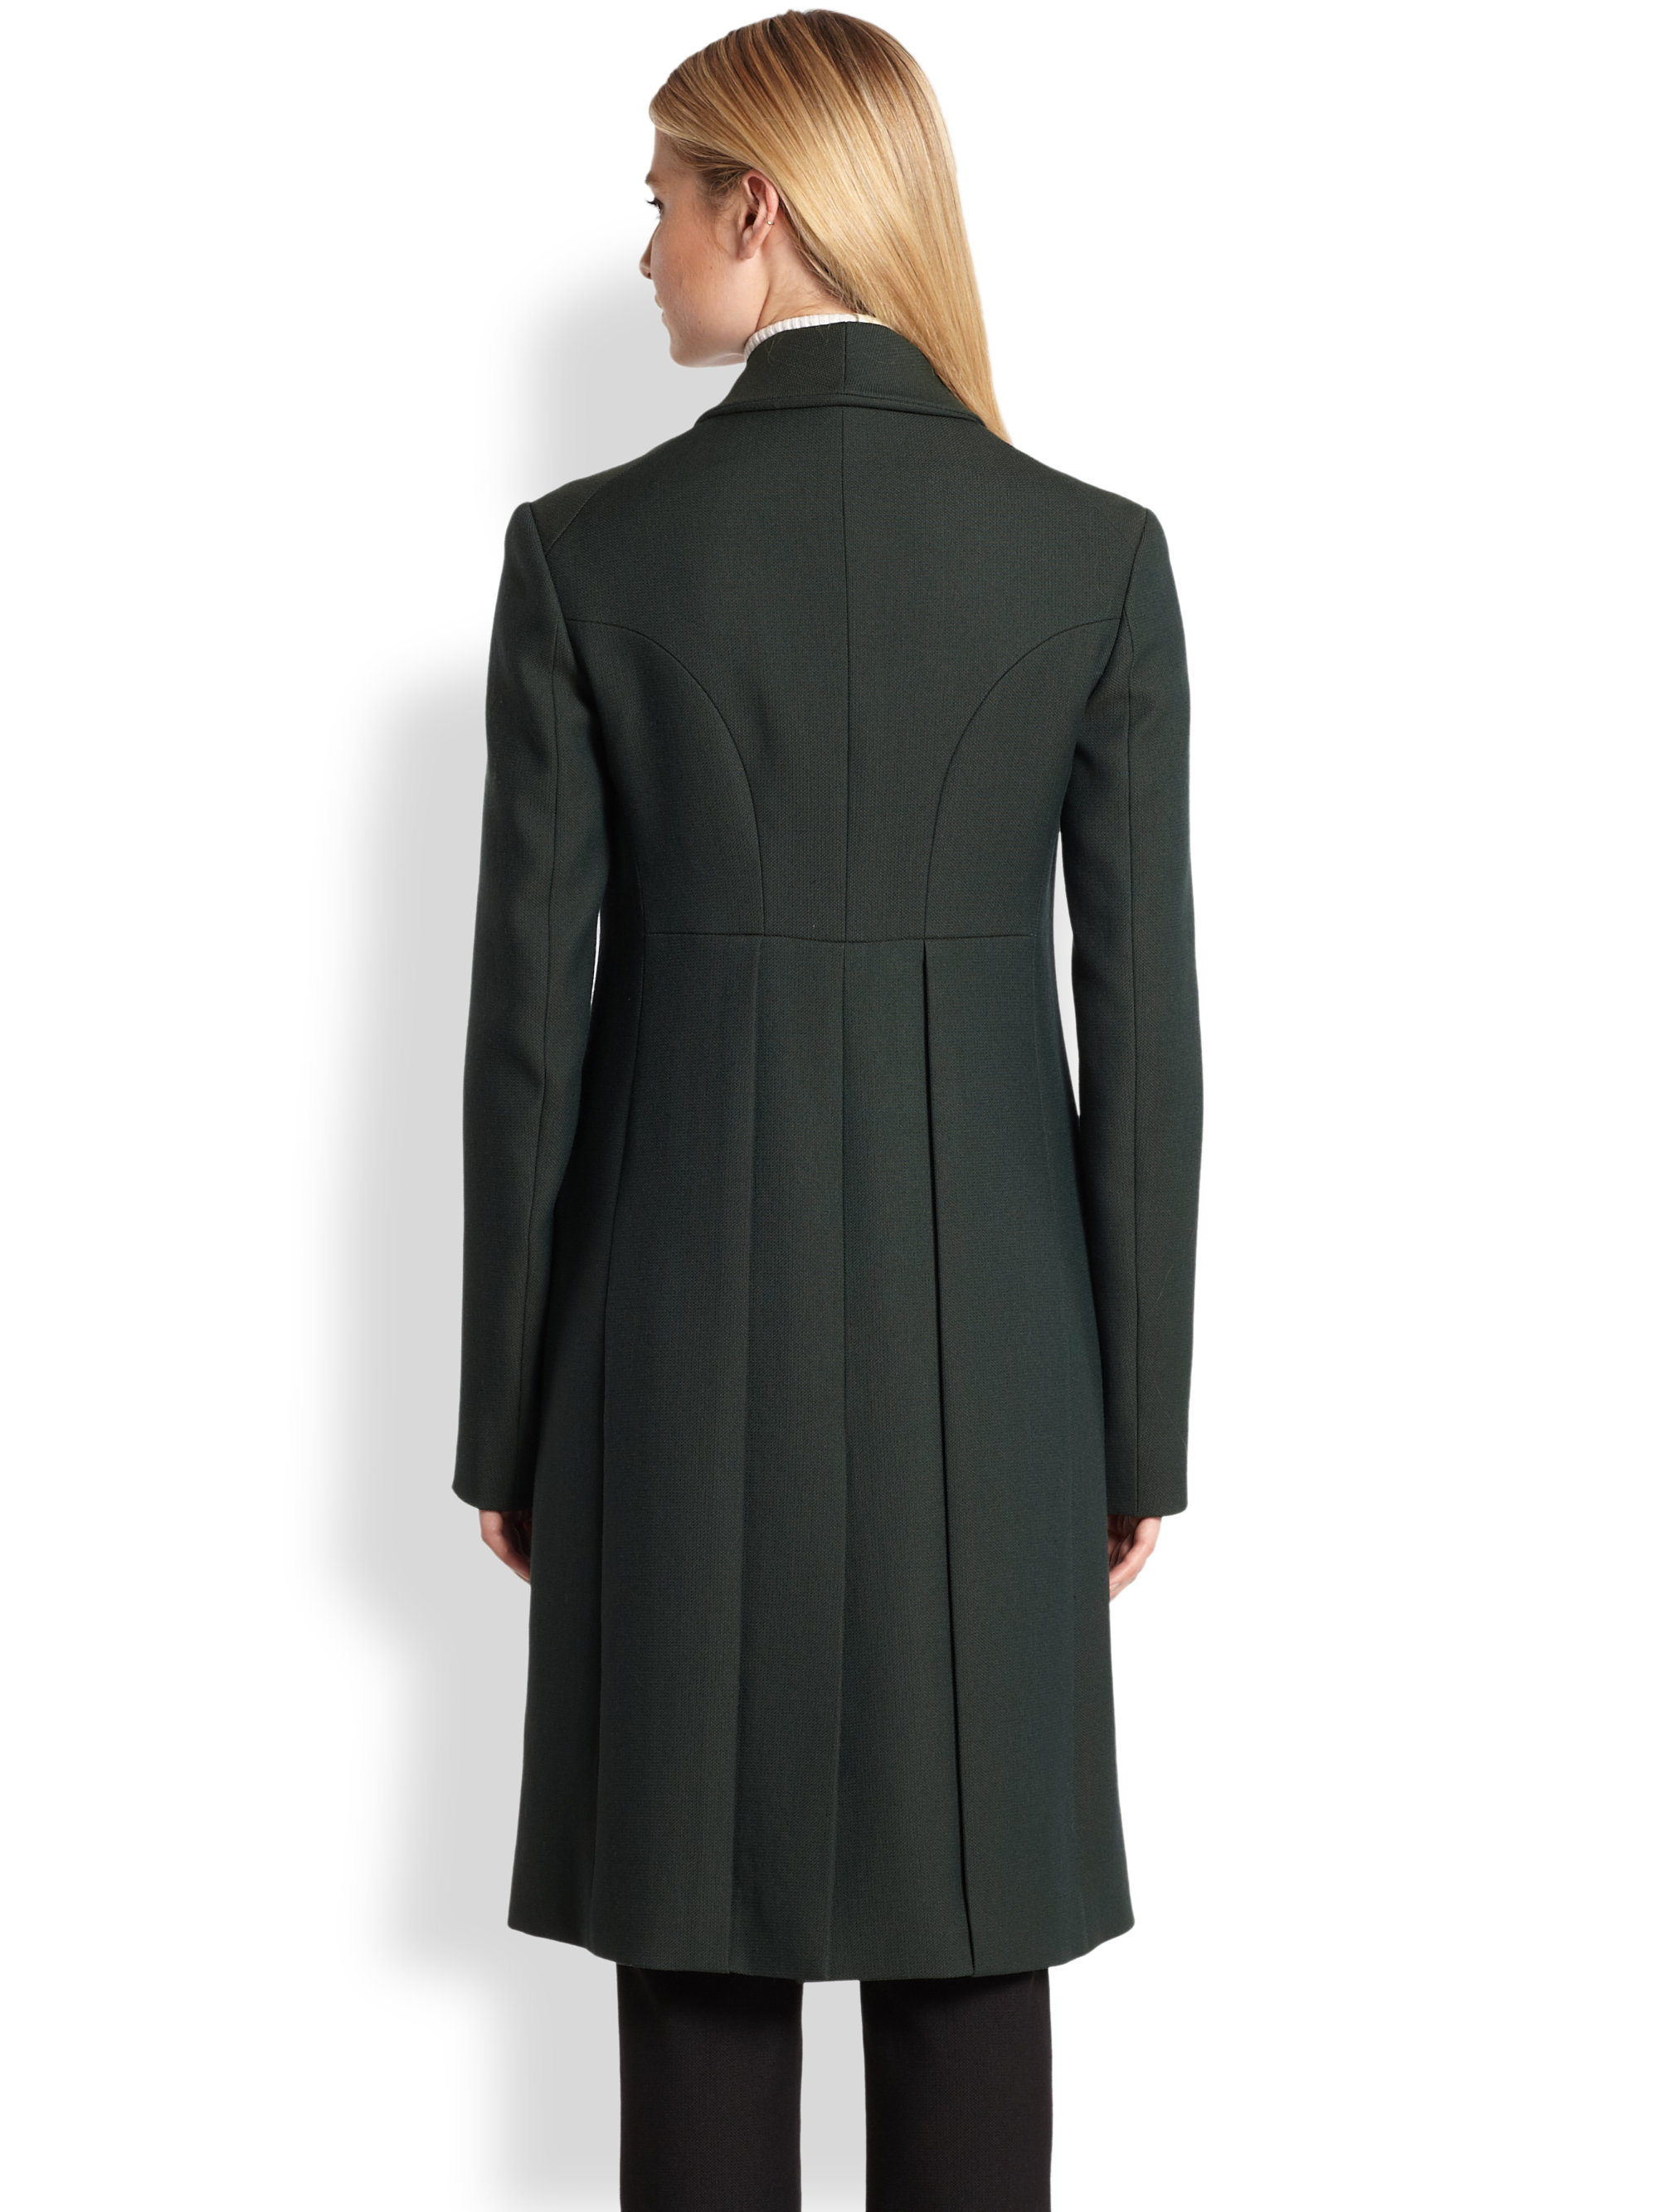 Lyst - The Row Norson Wool Coat in Green